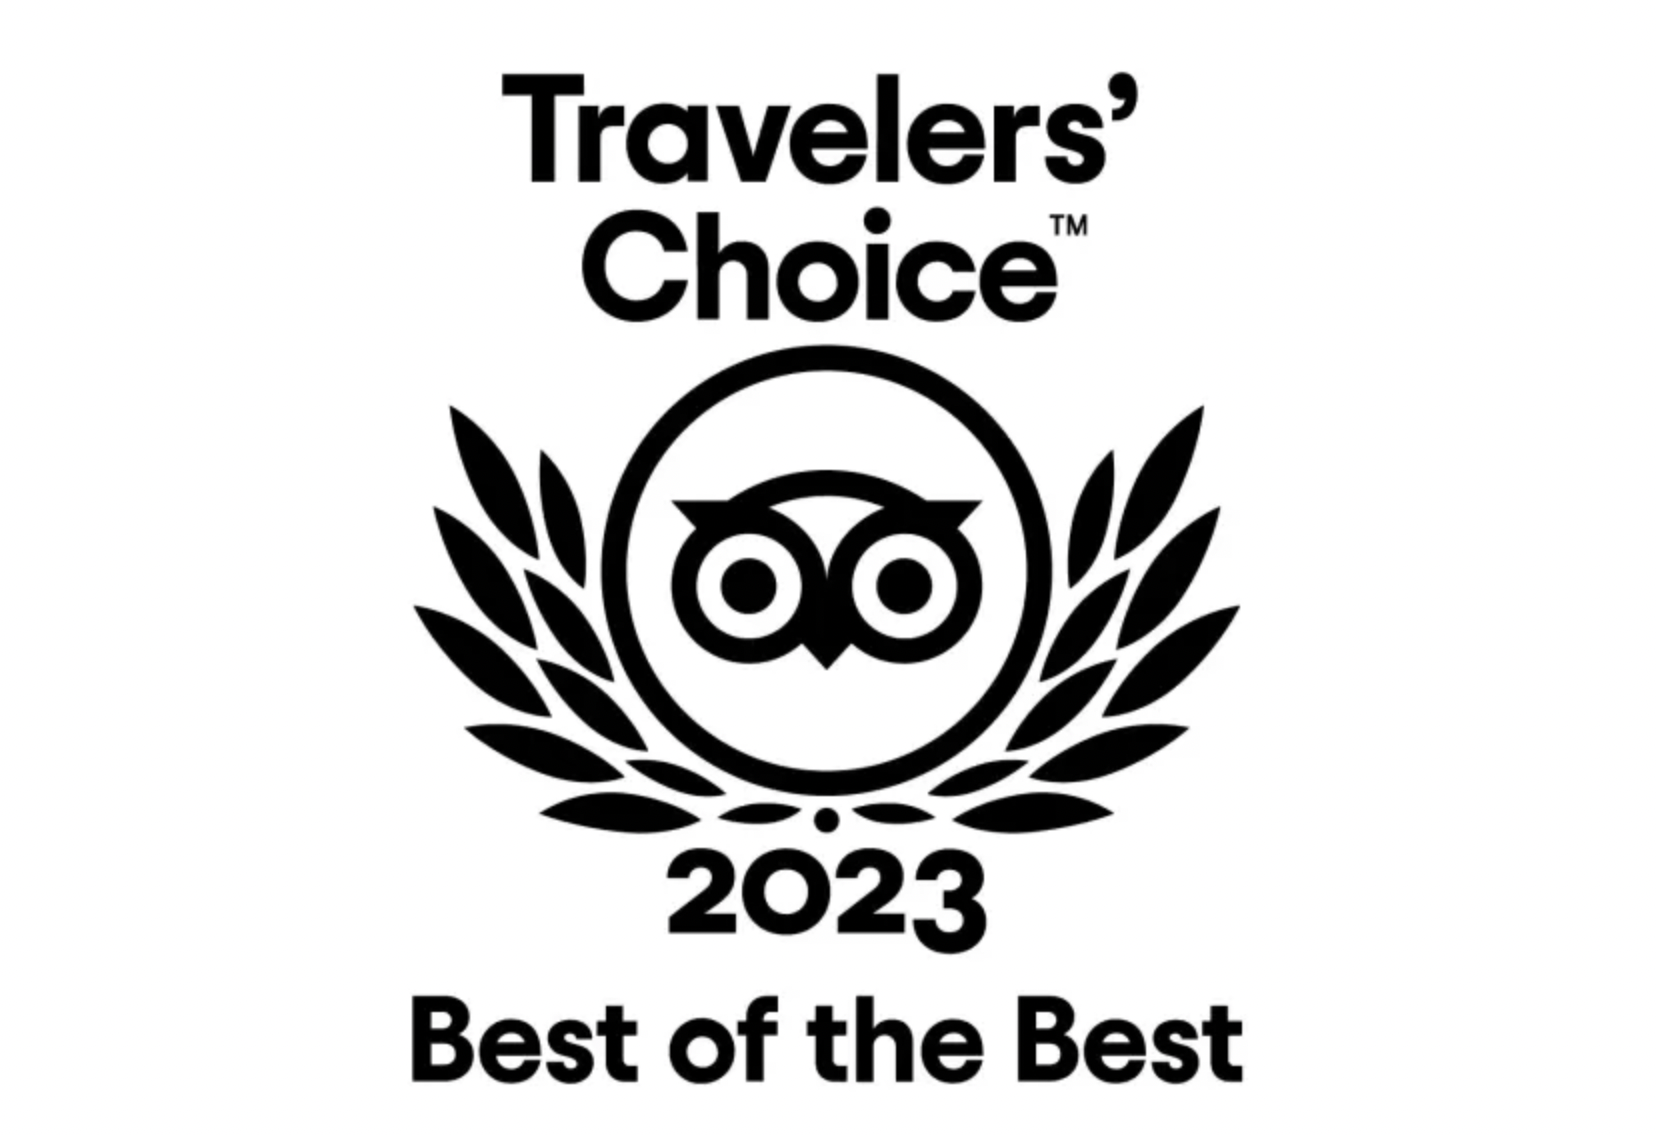 The Pavilions Amsterdam is a proud winner of  the Trip Advisor Traveler’s Choice Award Best of the Best 2023 and The Pavilions Phuket and Bali the Trip Advisor Traveller’s Choice Award 2023